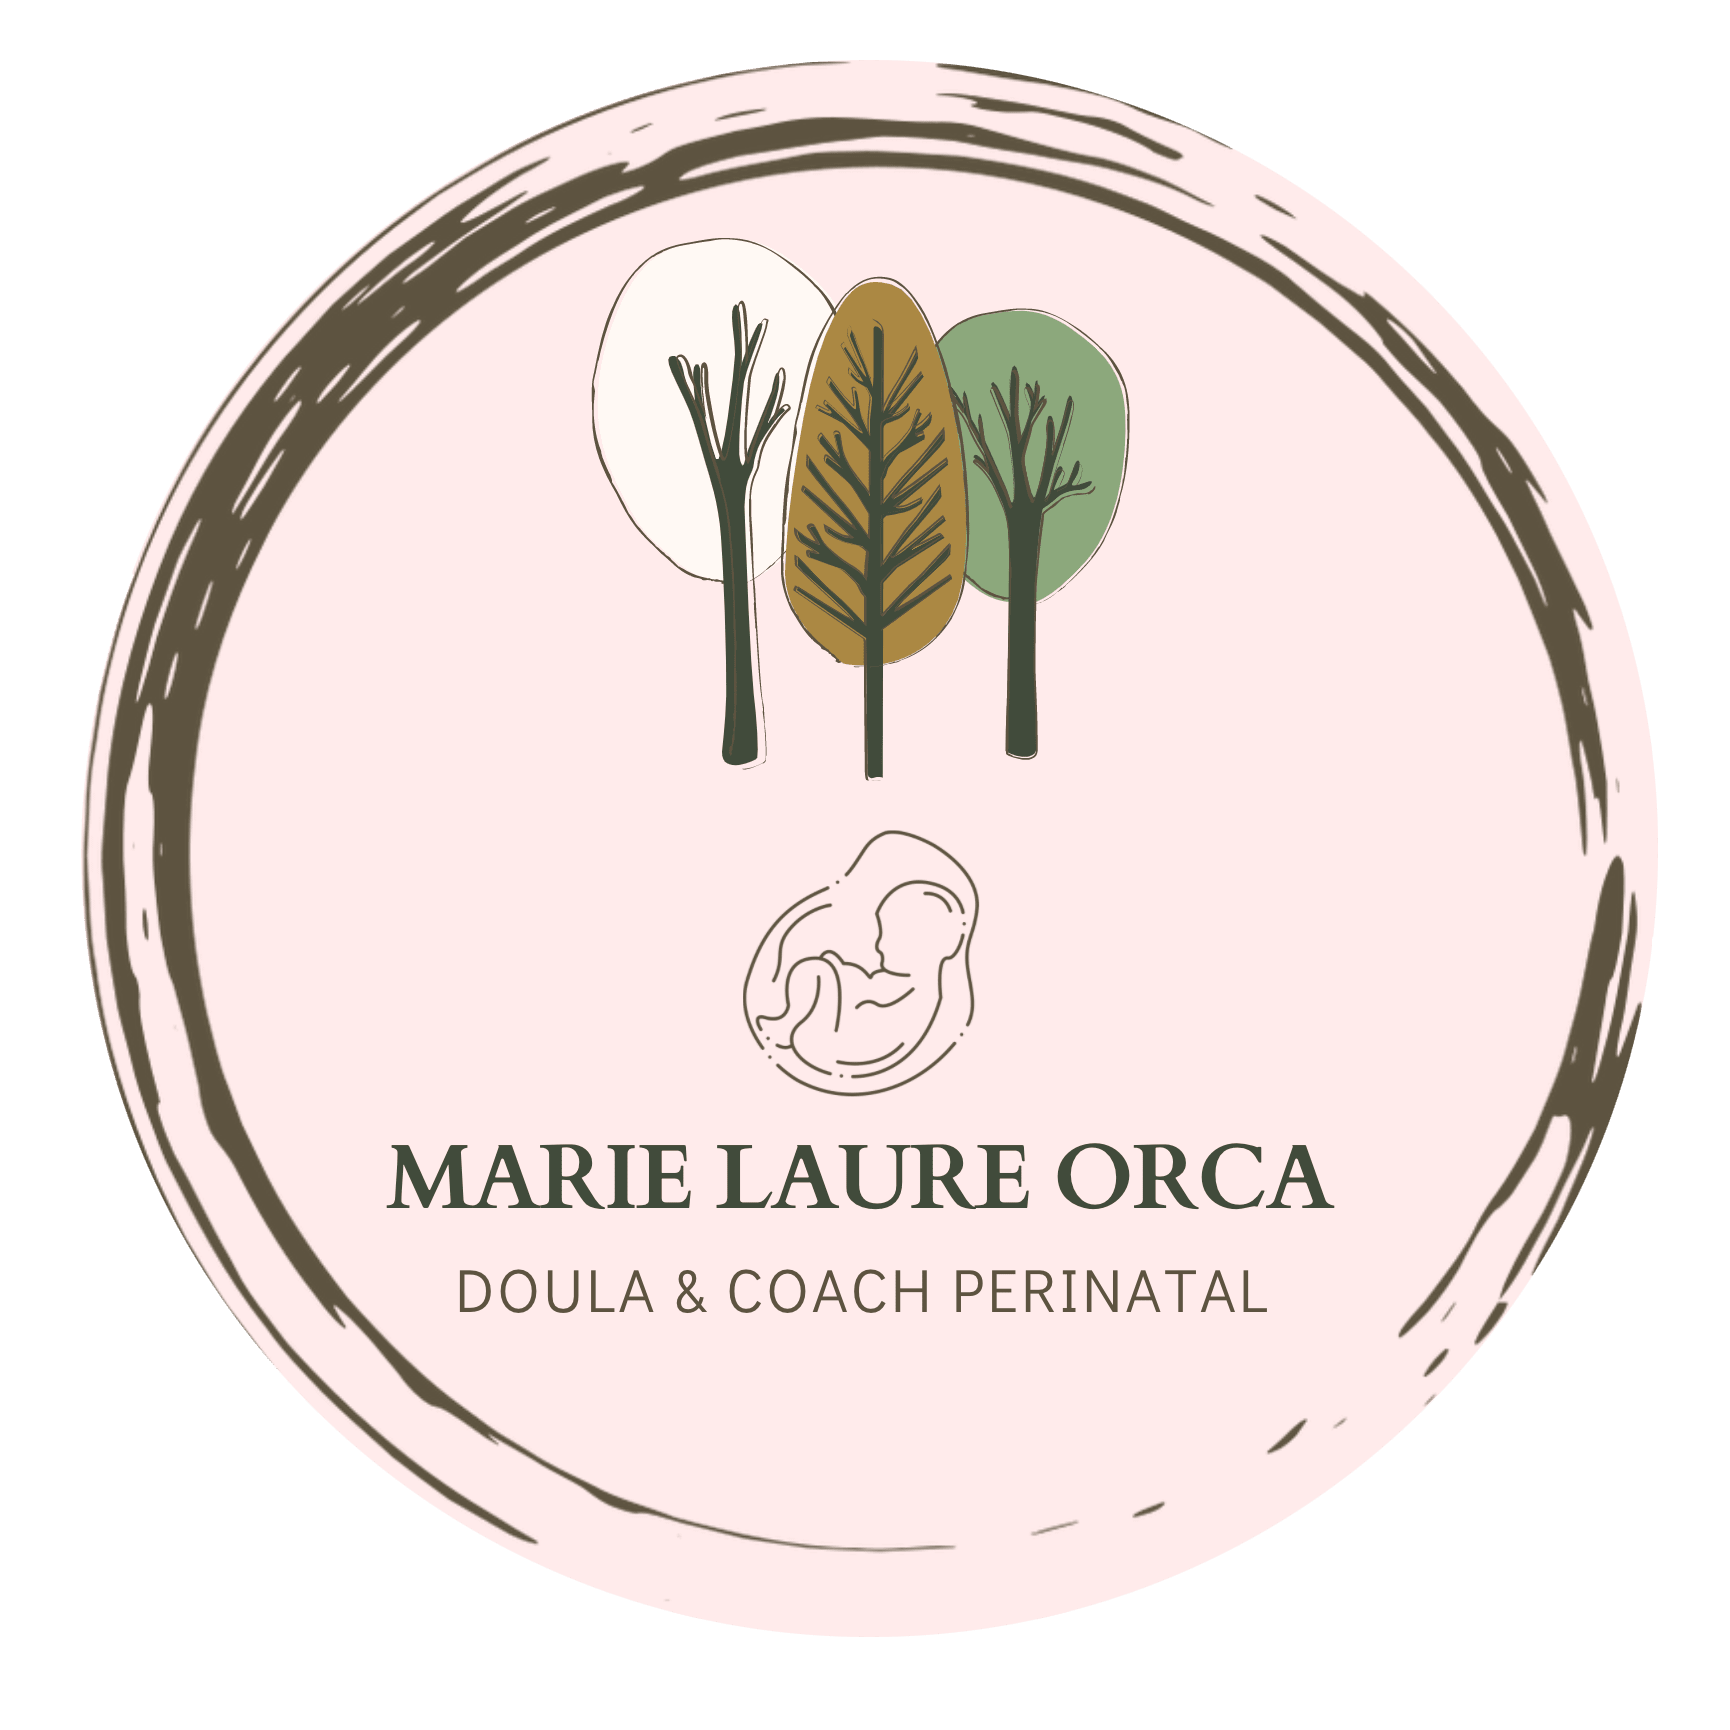 Marie Laure Orca